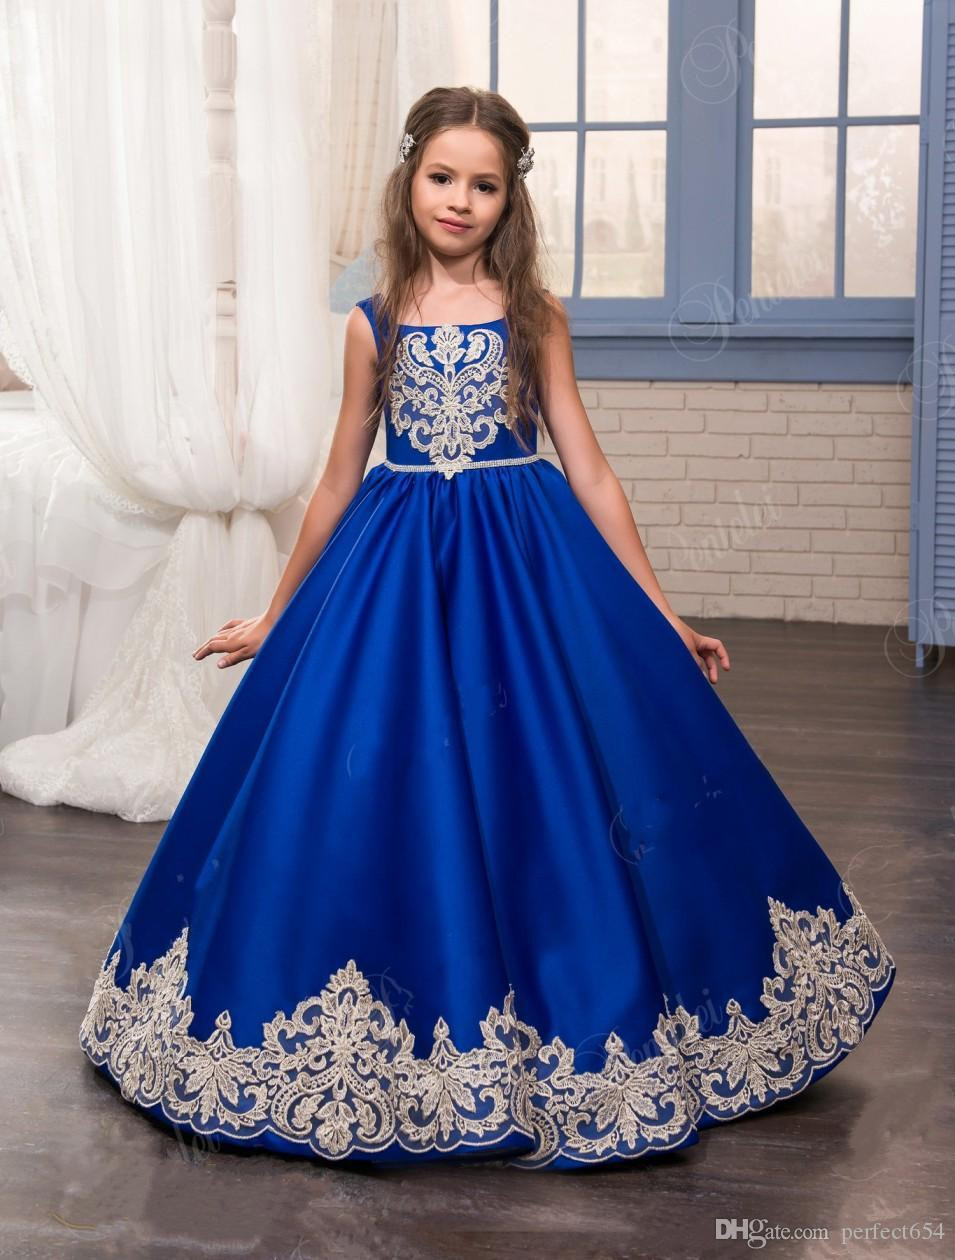 Kids Party Dresses
 Kids Christmas Dresses For Party 2017 Royal Blue Girl